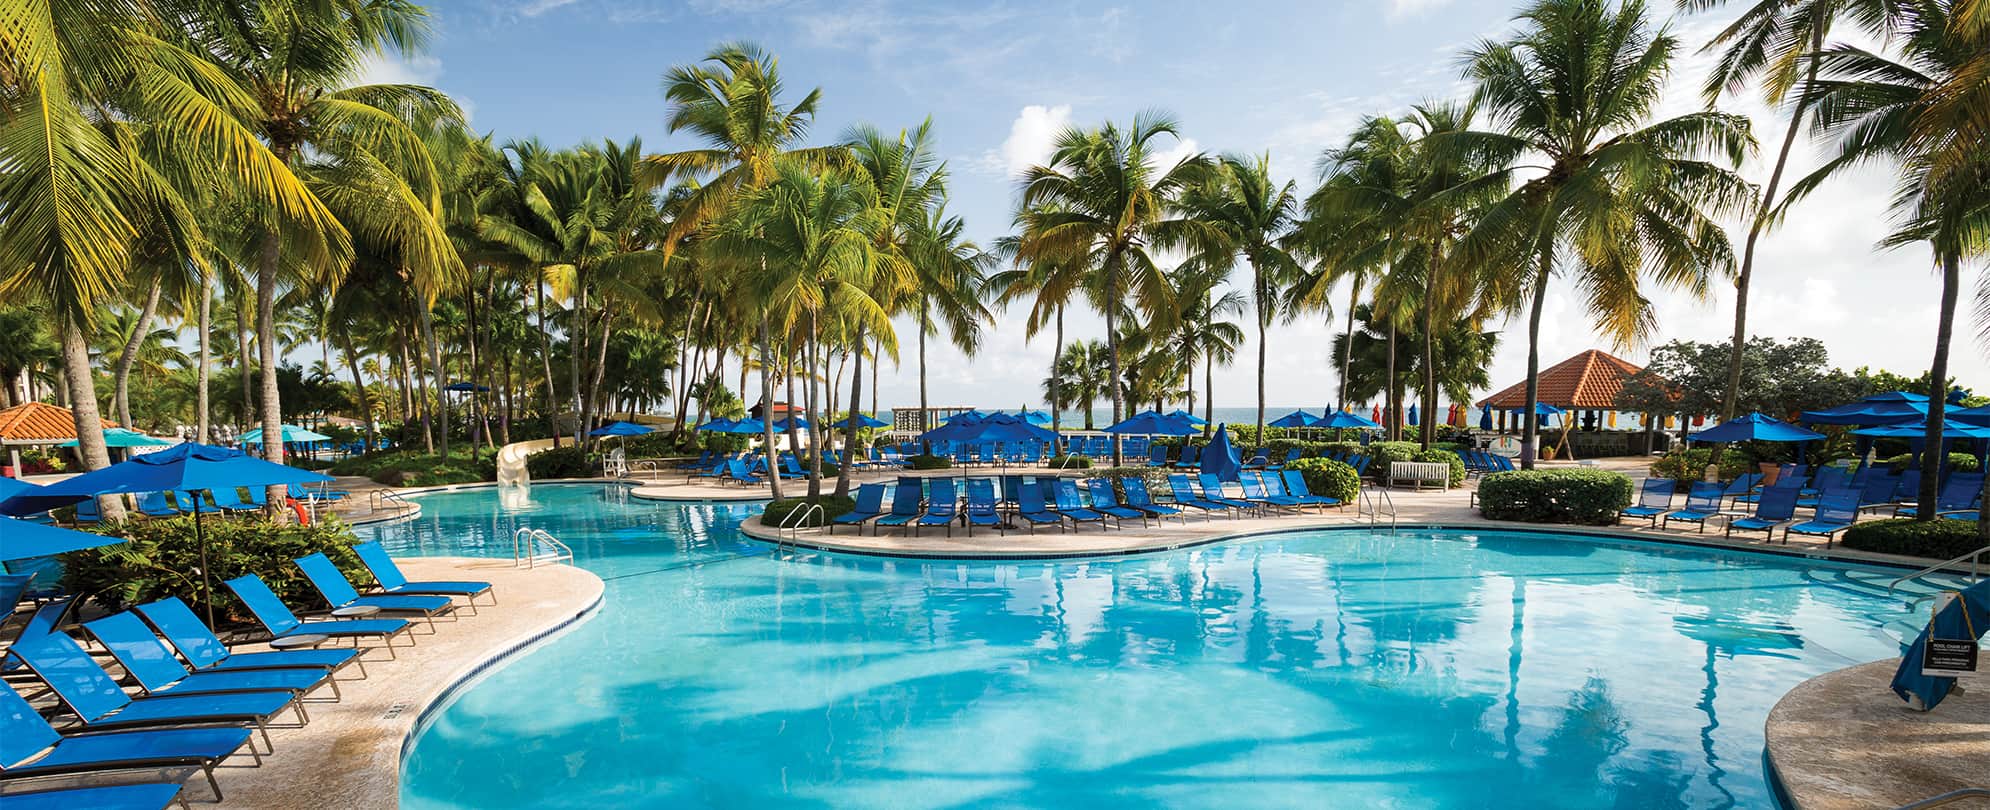 An oceanfront pool with a slide surrounded by palm trees and blue chairs at Margaritaville Vacation Club resort in Rio Mar.